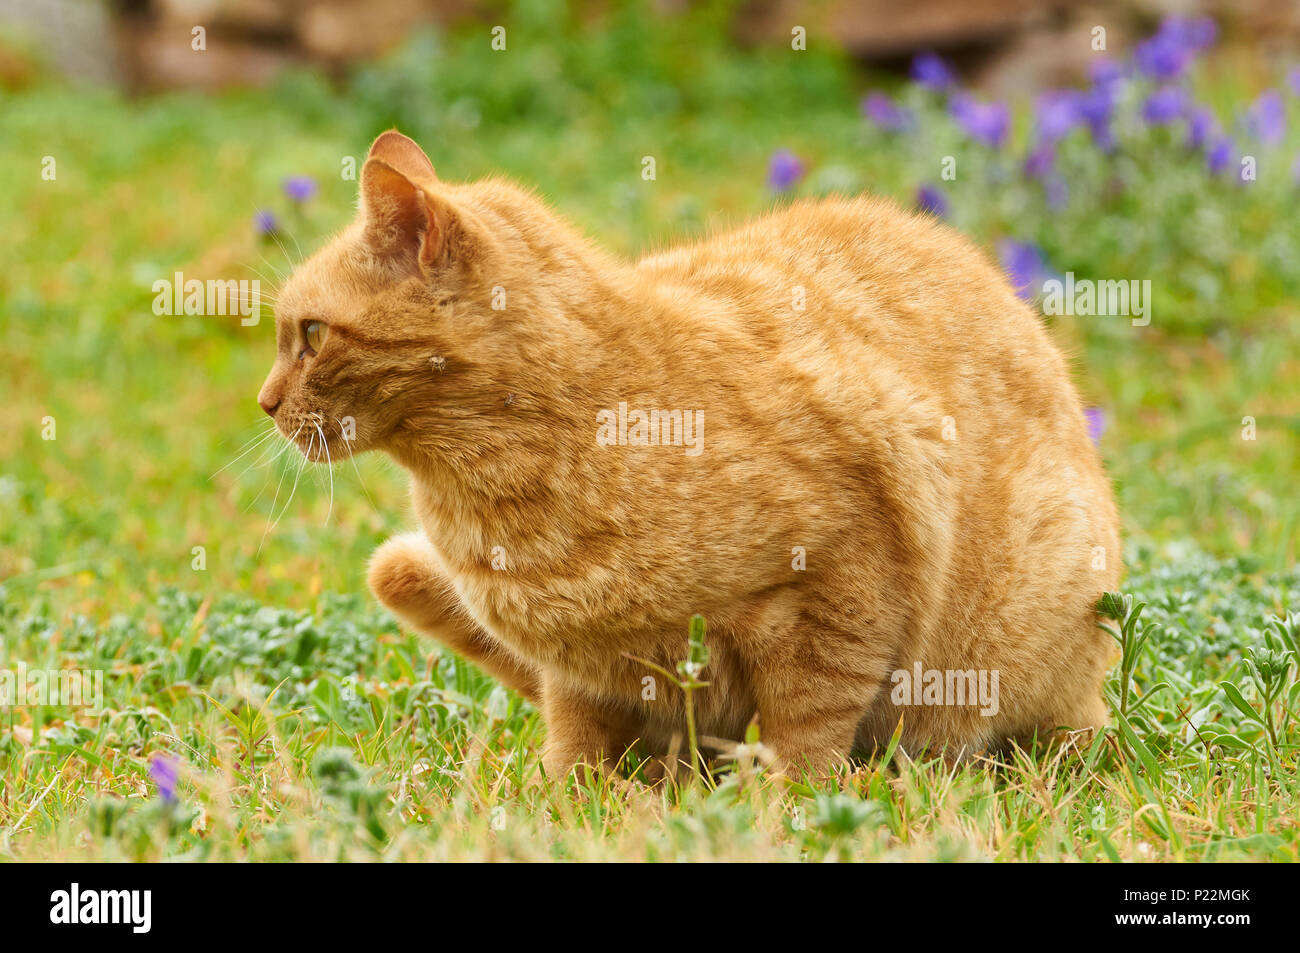 Ginger domestic cat (Felis silvestris catus) in a green grass field with flowers (Formentera, Balearic Islands, Spain) Stock Photo